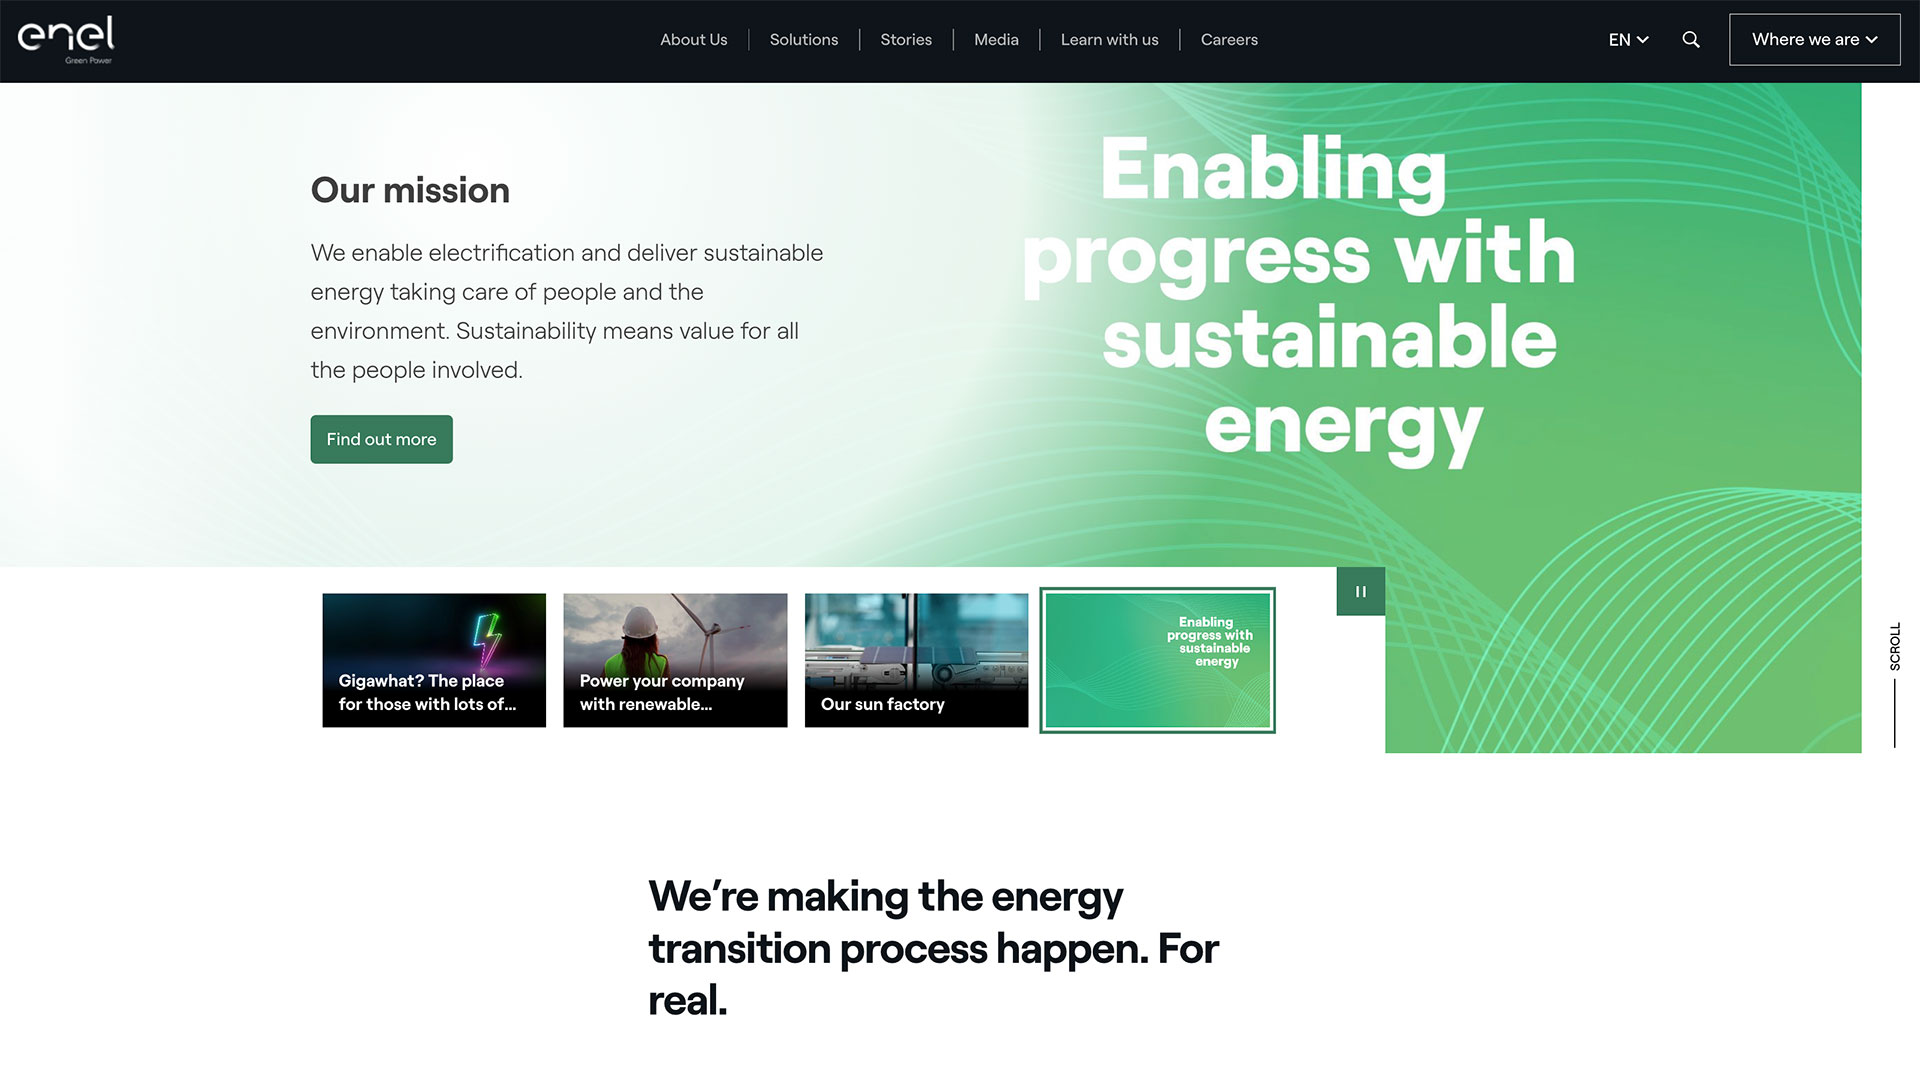 A new look for the Enel Green Power website